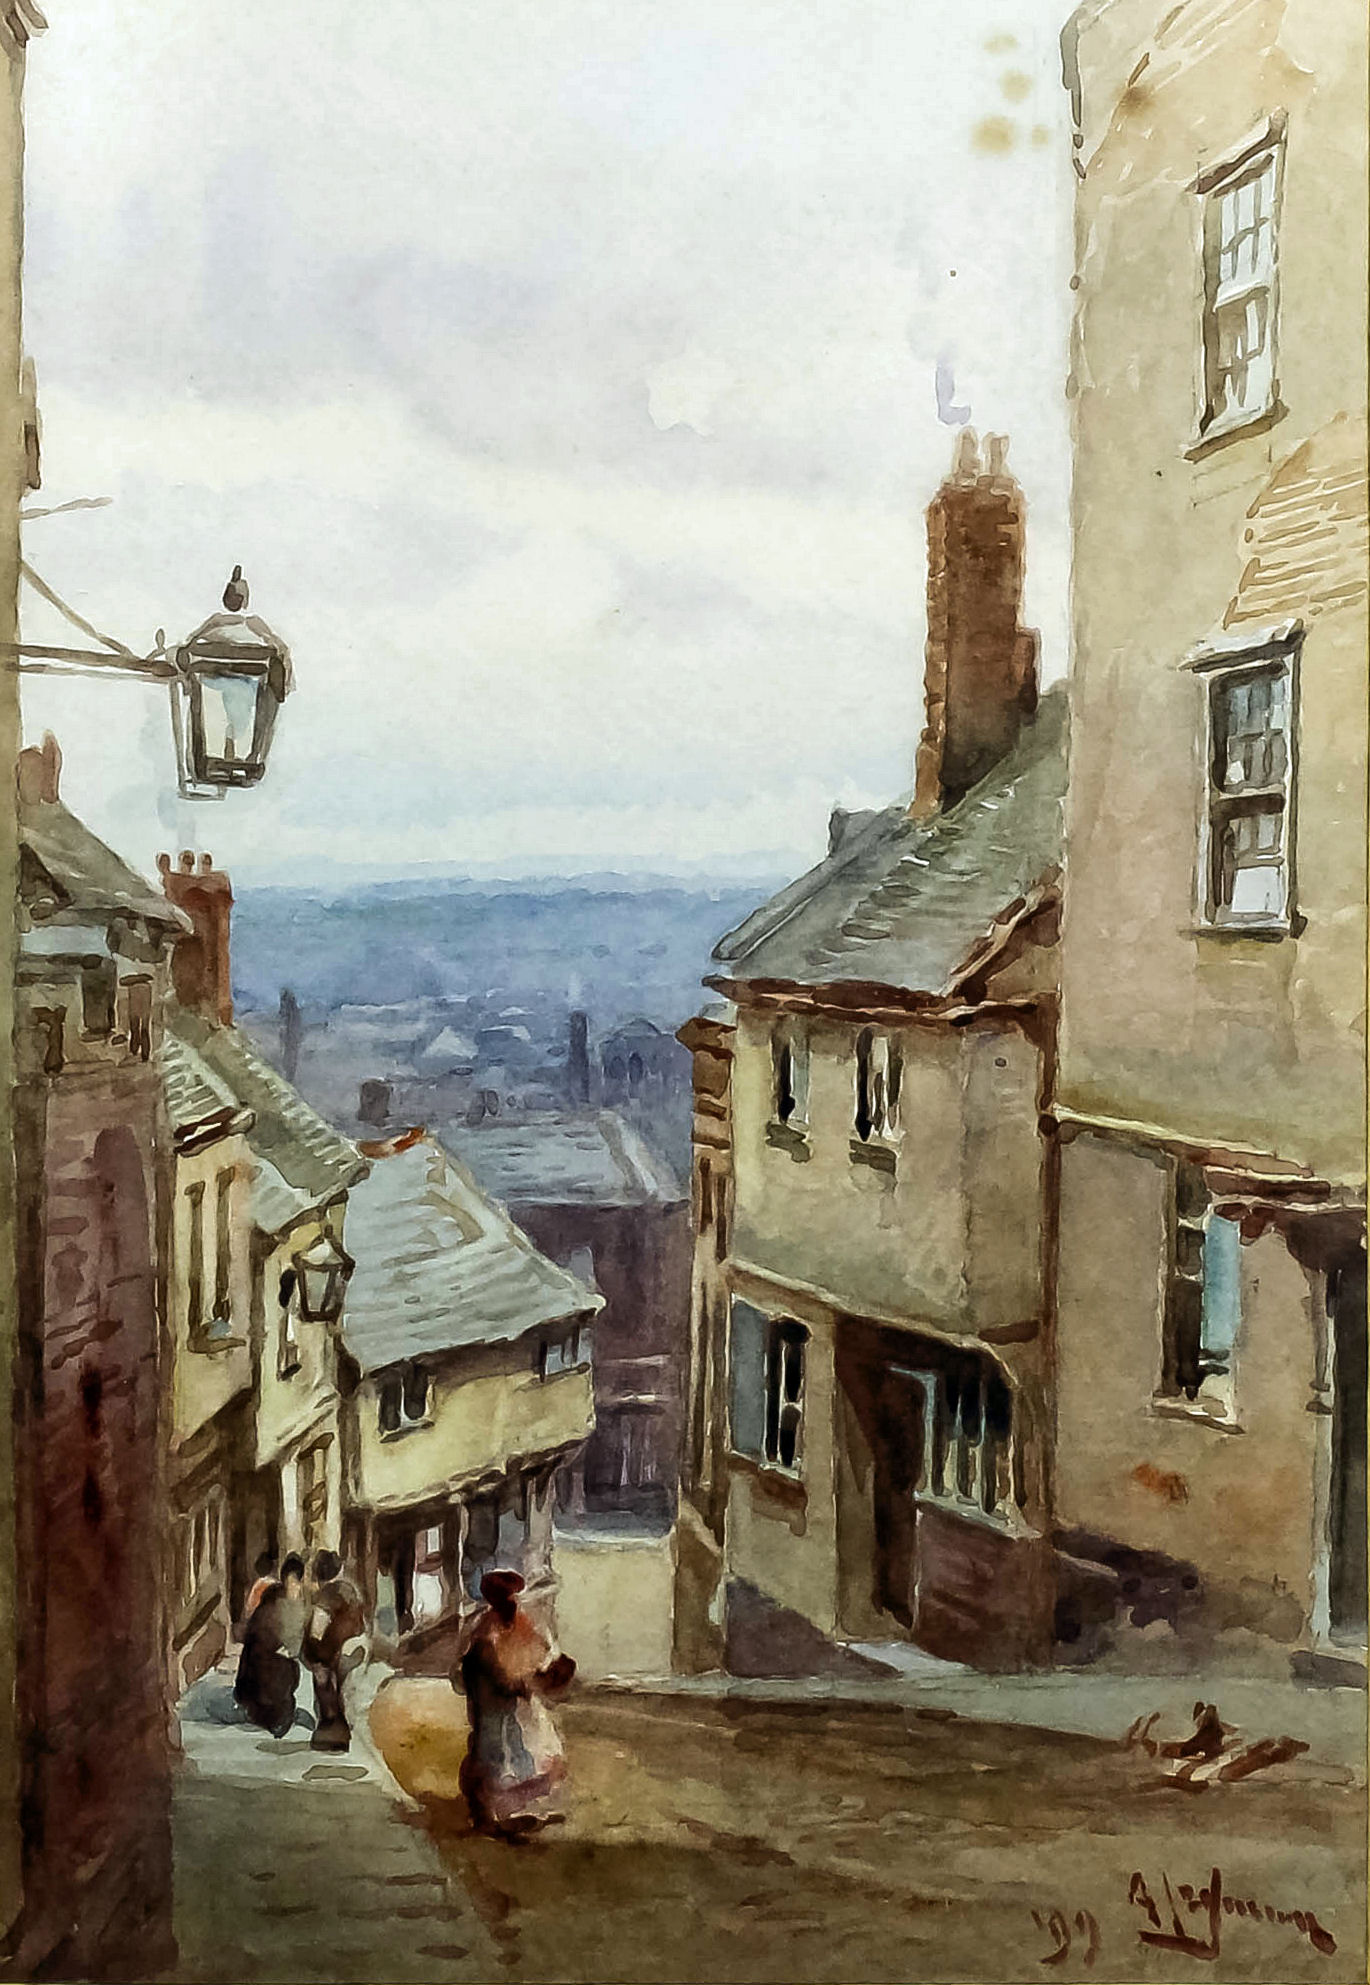 Alfred Leyman (1856-1933) - Watercolour - "Old Exeter", 7.5ins x 7.75ins, in gilt frame and glazed